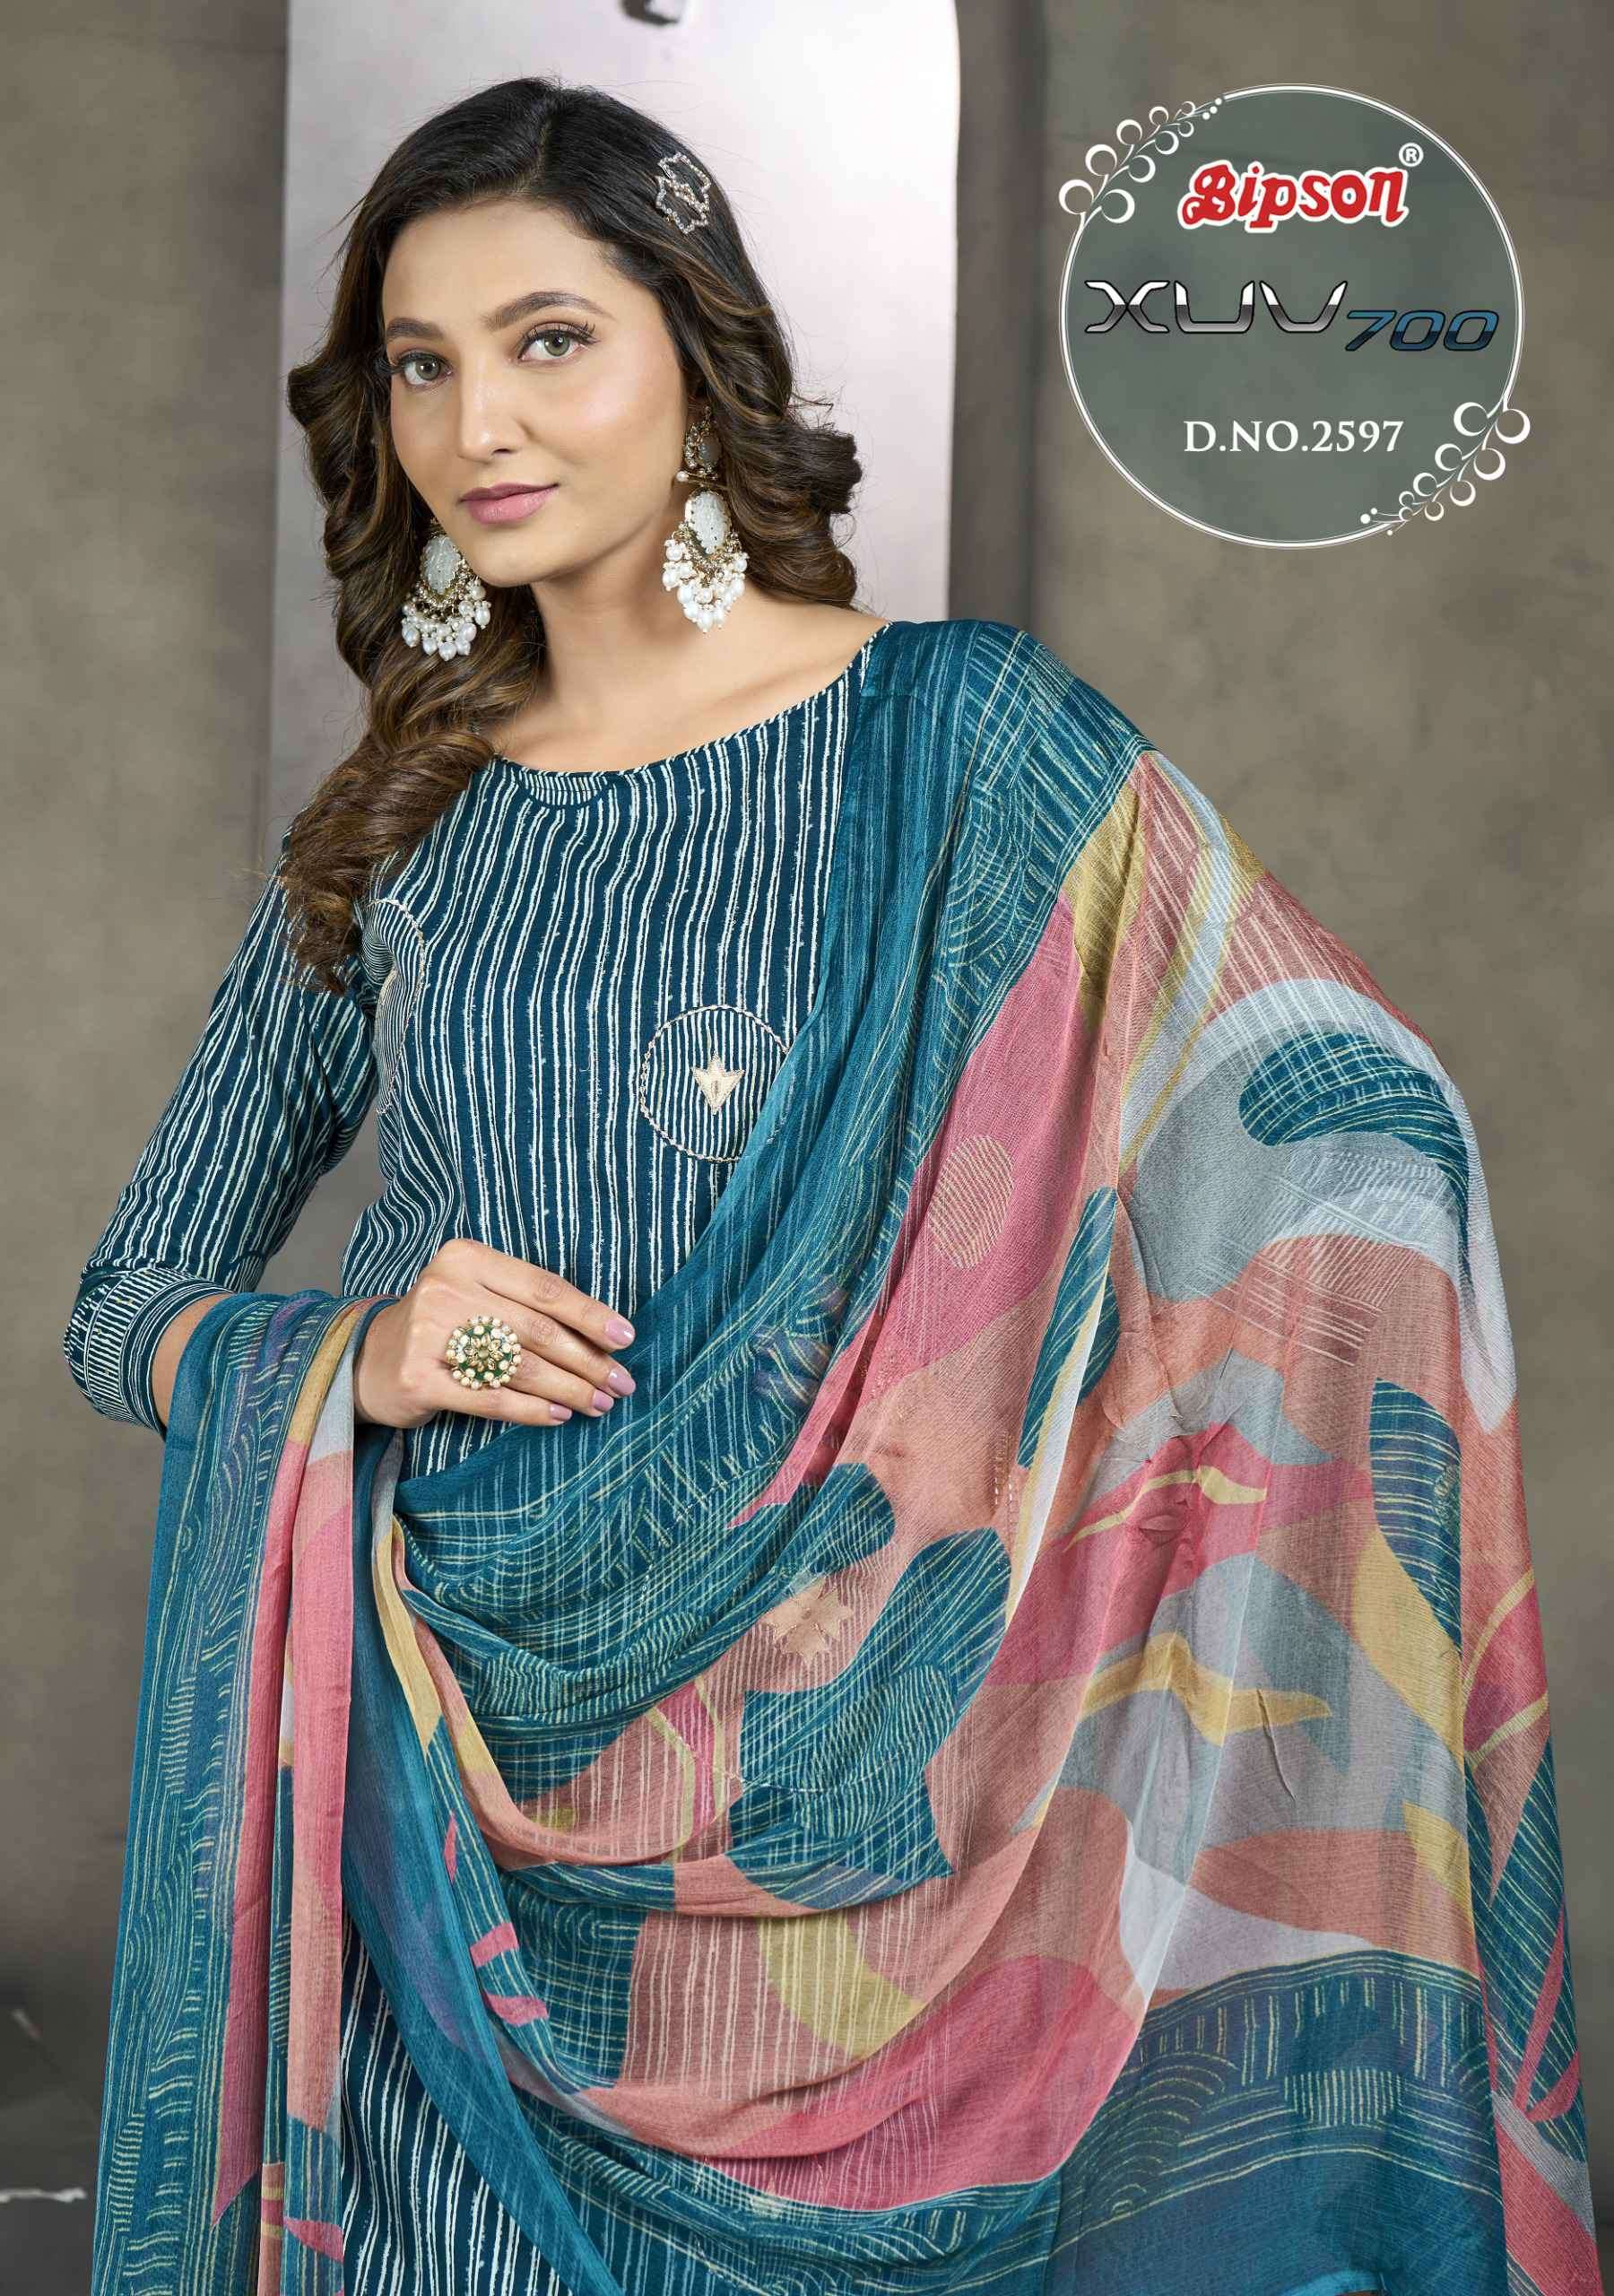 Bipson Xuv 2597 Ethnic Designs Cotton Dress Catalog New Collection